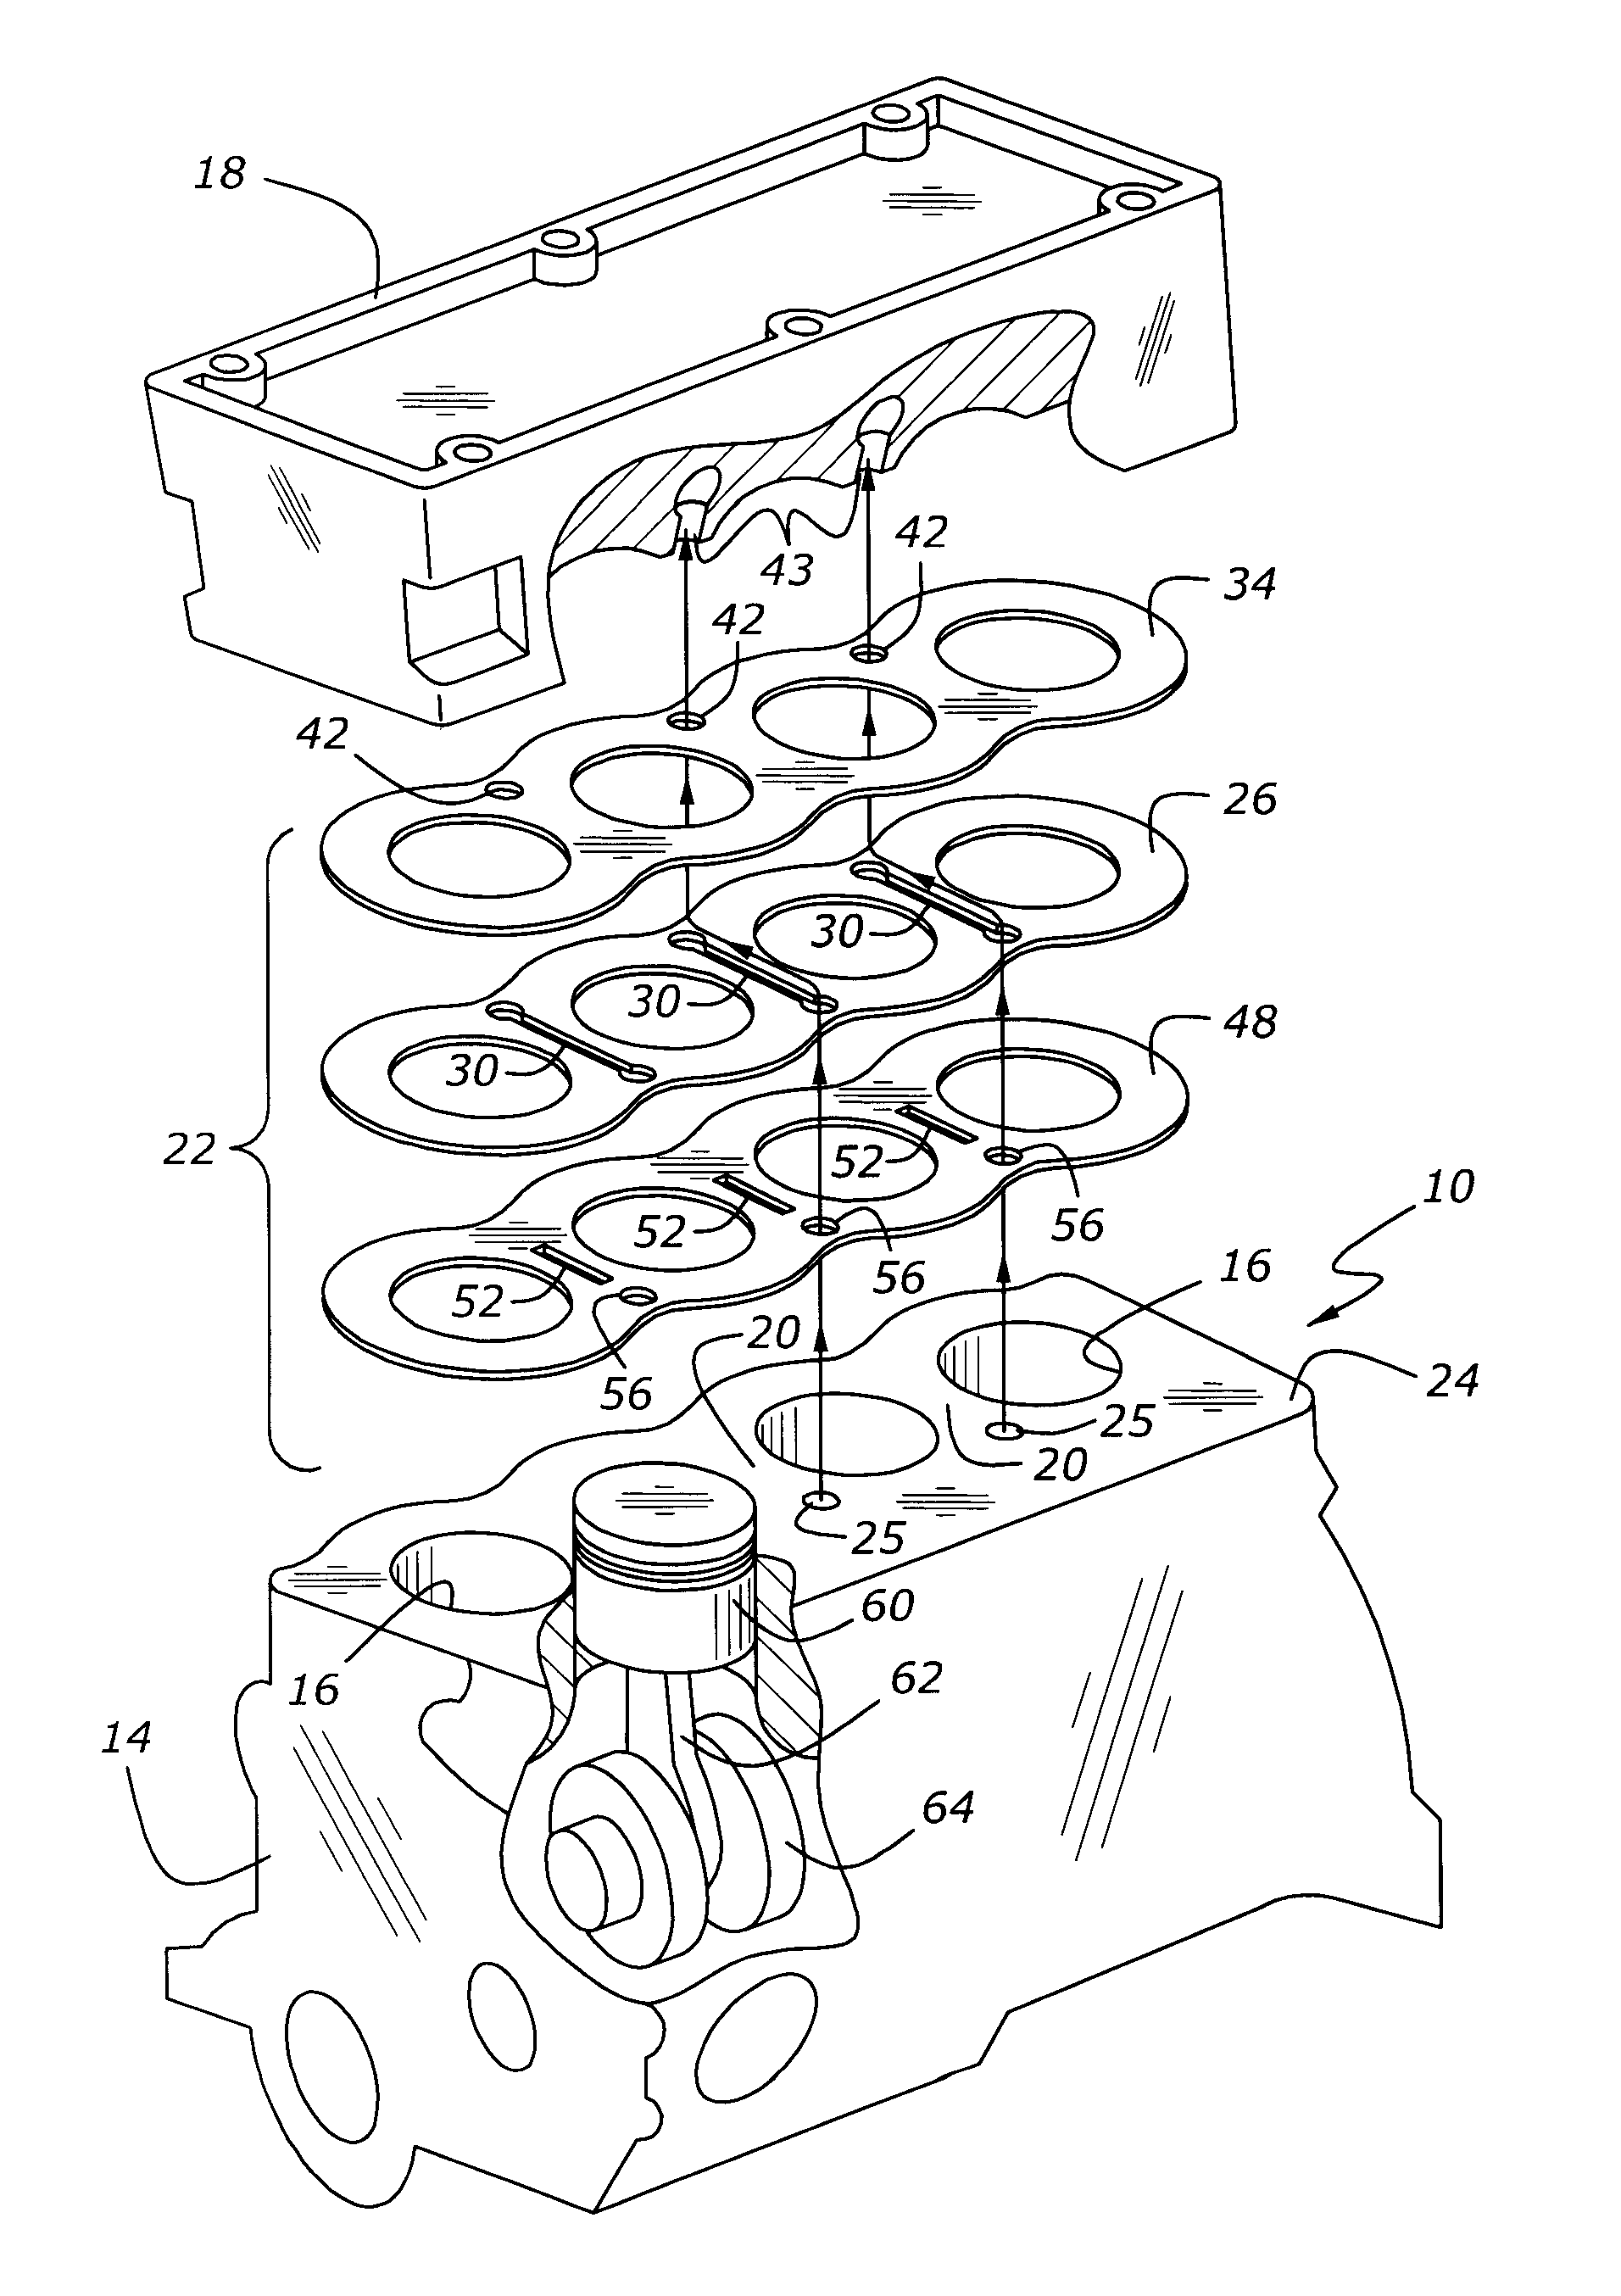 Internal combustion engine with direct cooling of cylinder components